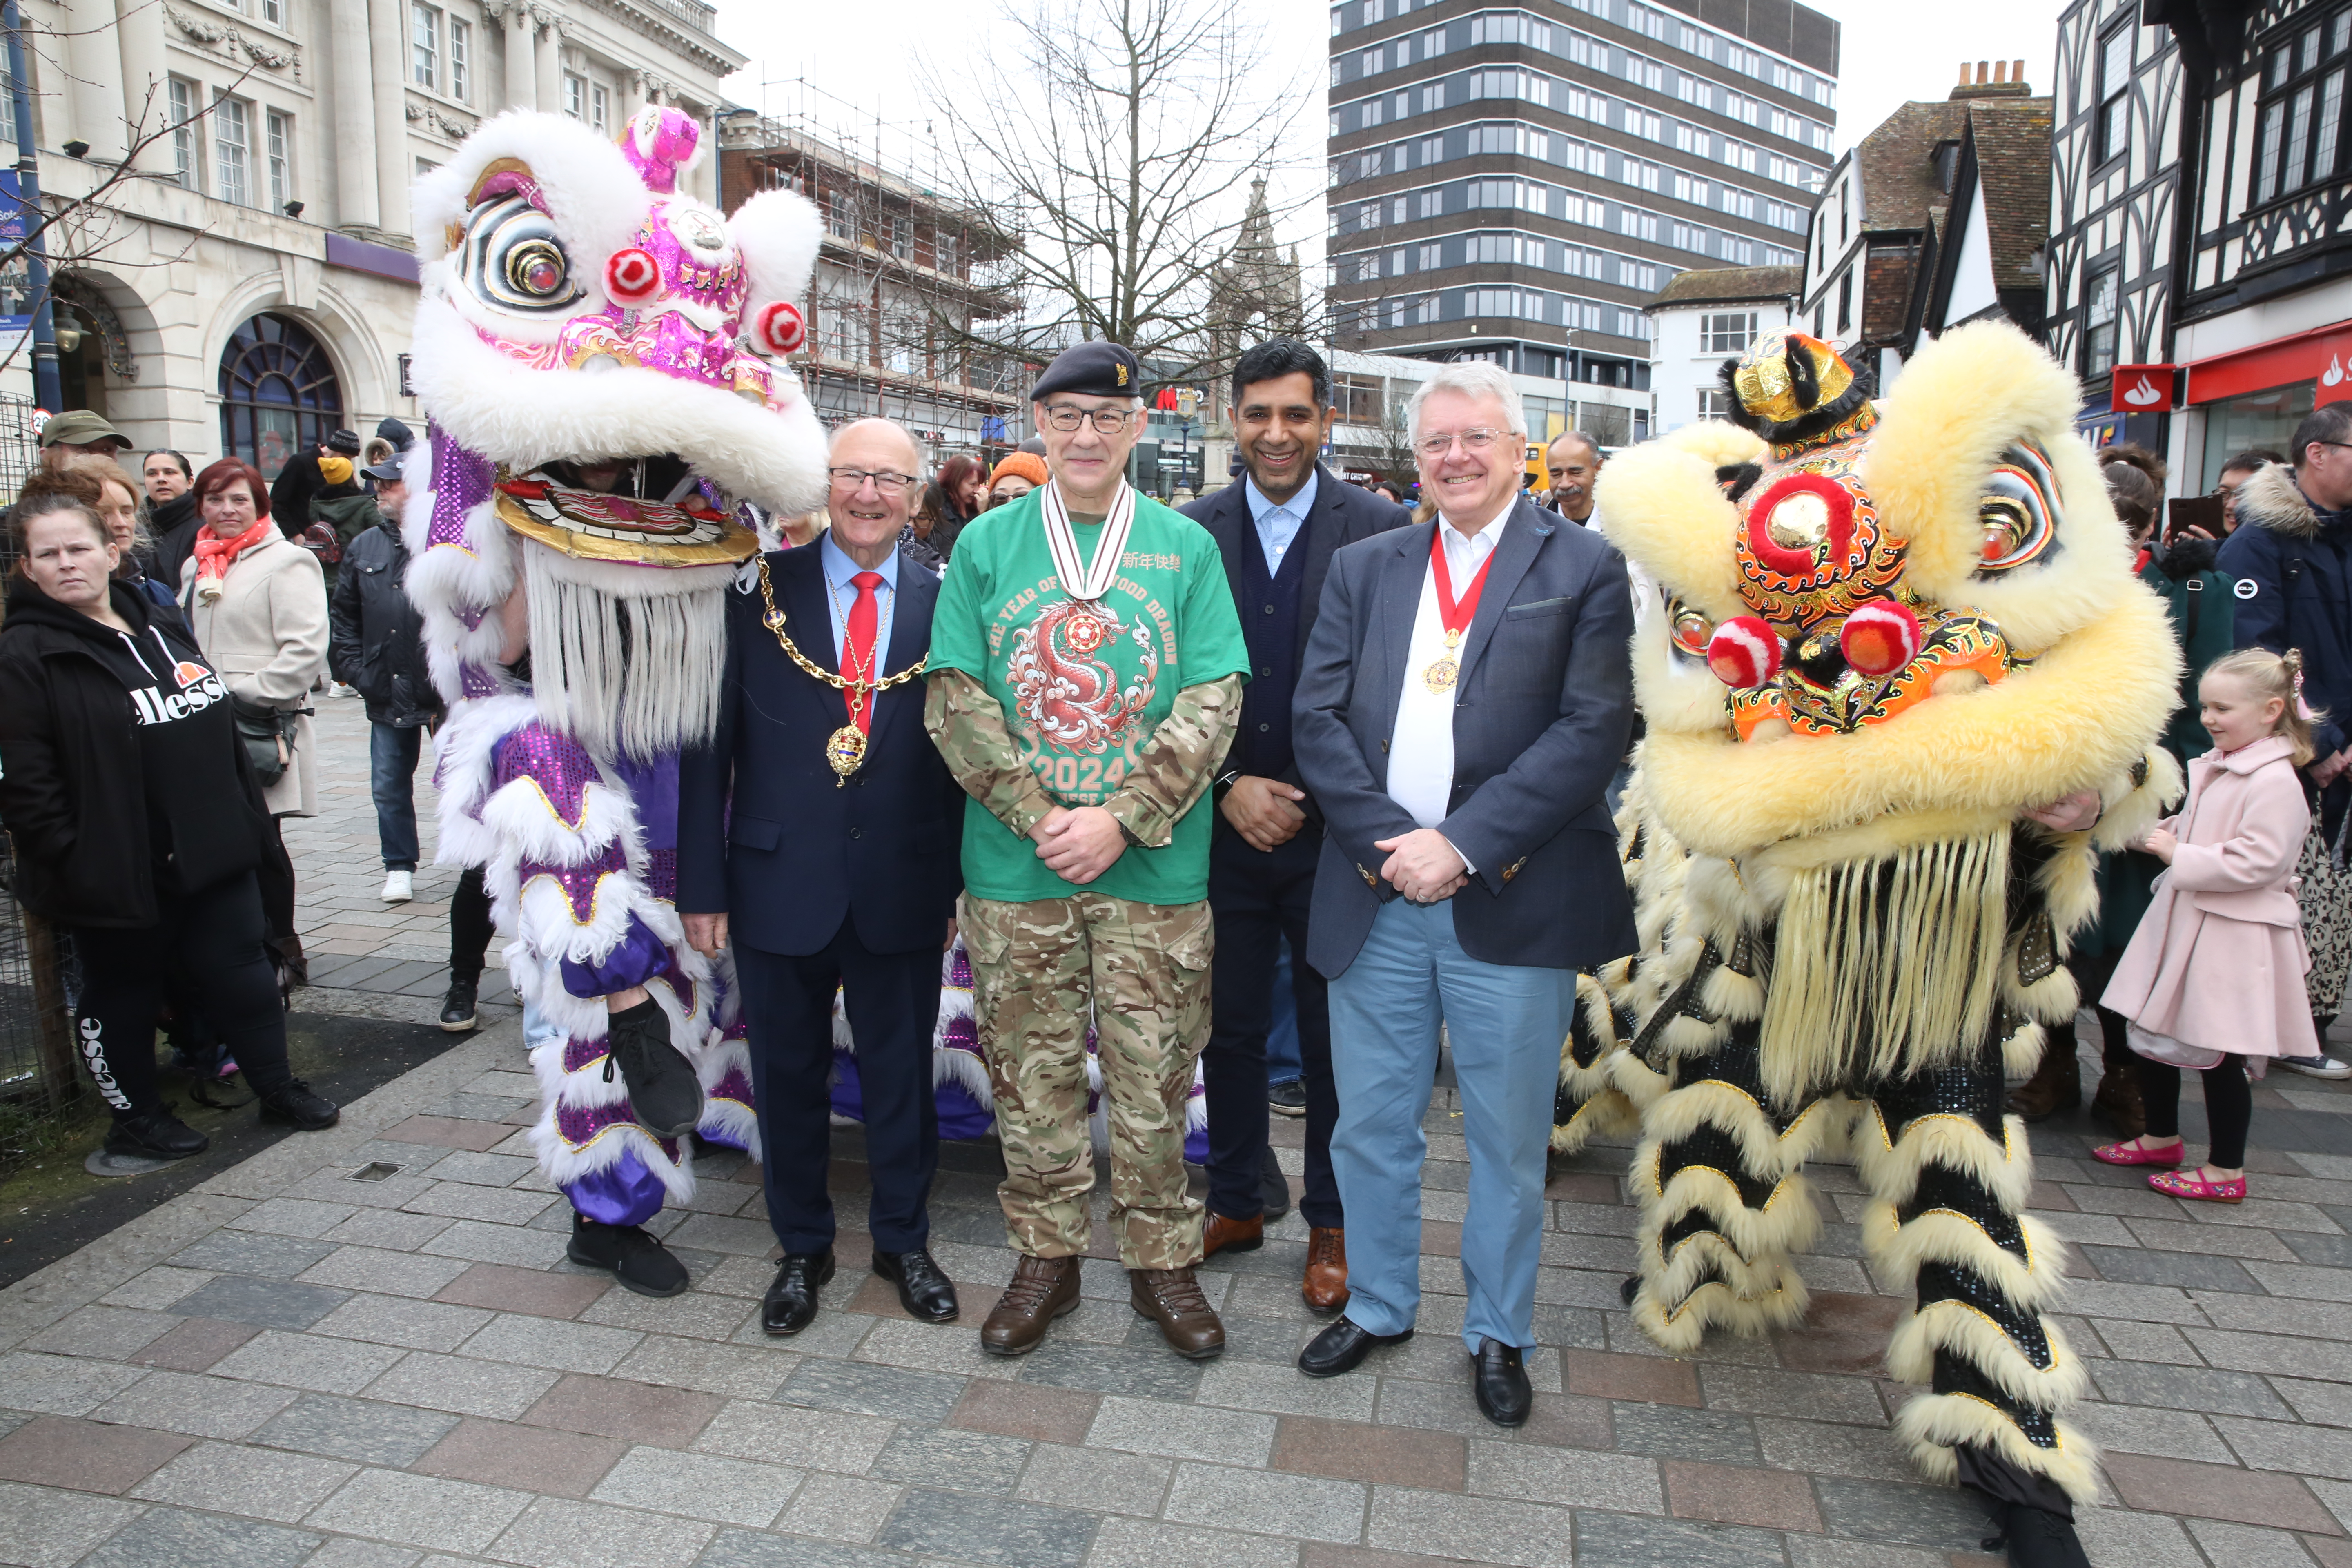 People of Maidstone celebrate Lunar New Year